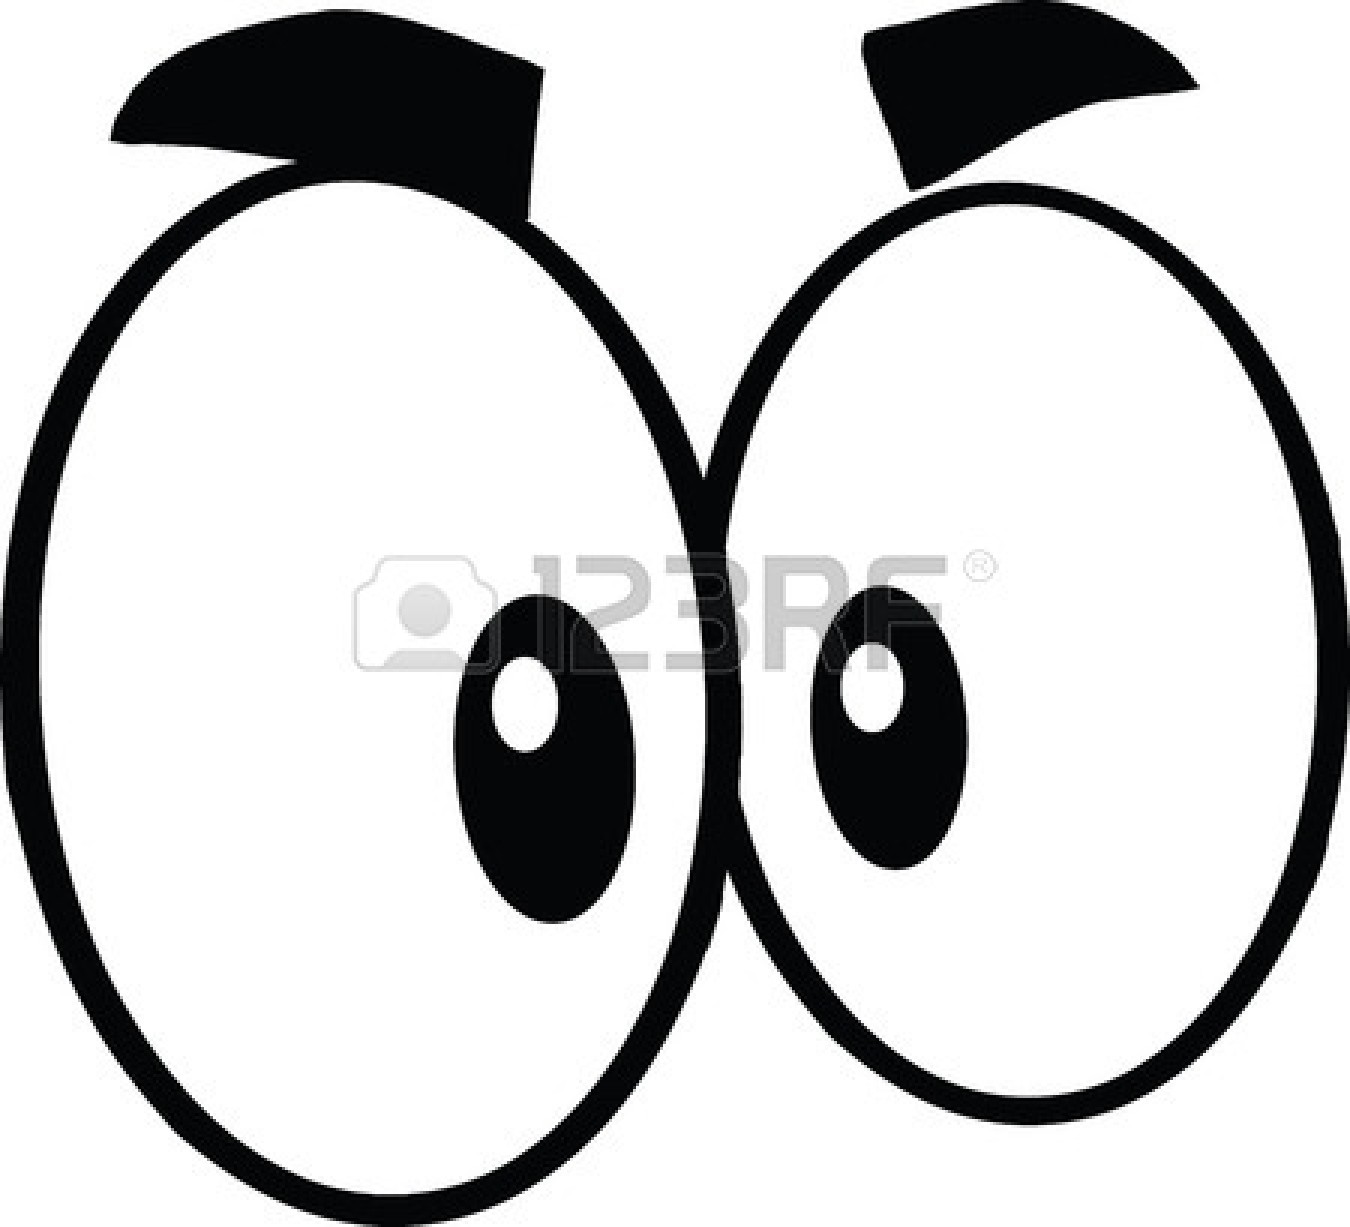 Looking Eyes Clip Art Clipart Panda Free Clipart Images